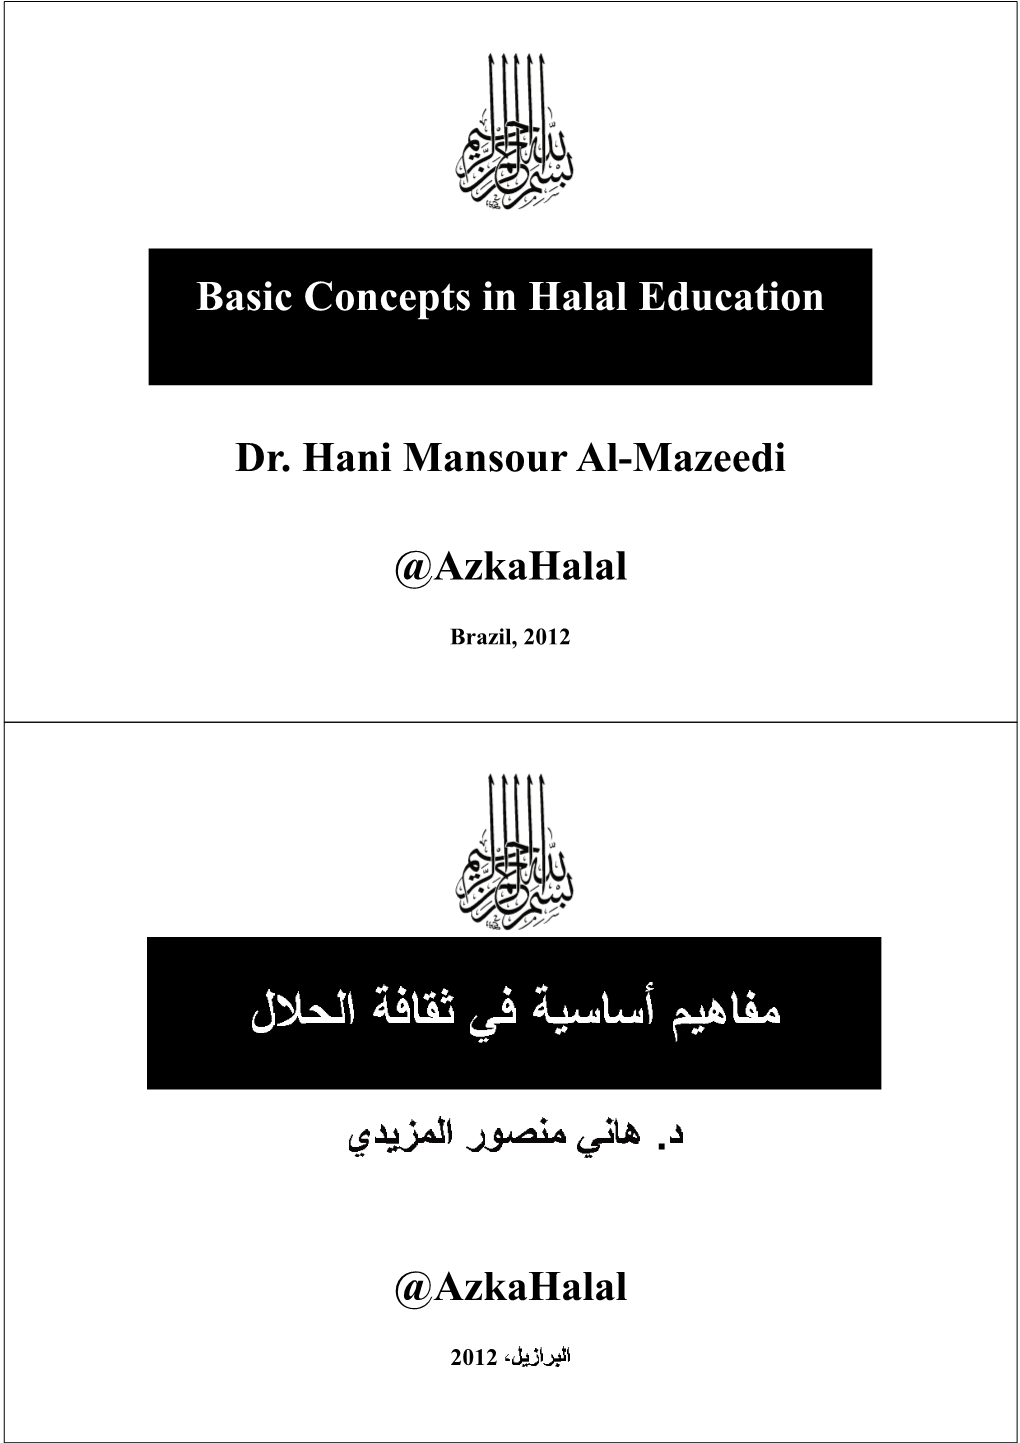 Basic Concepts in Halal Education